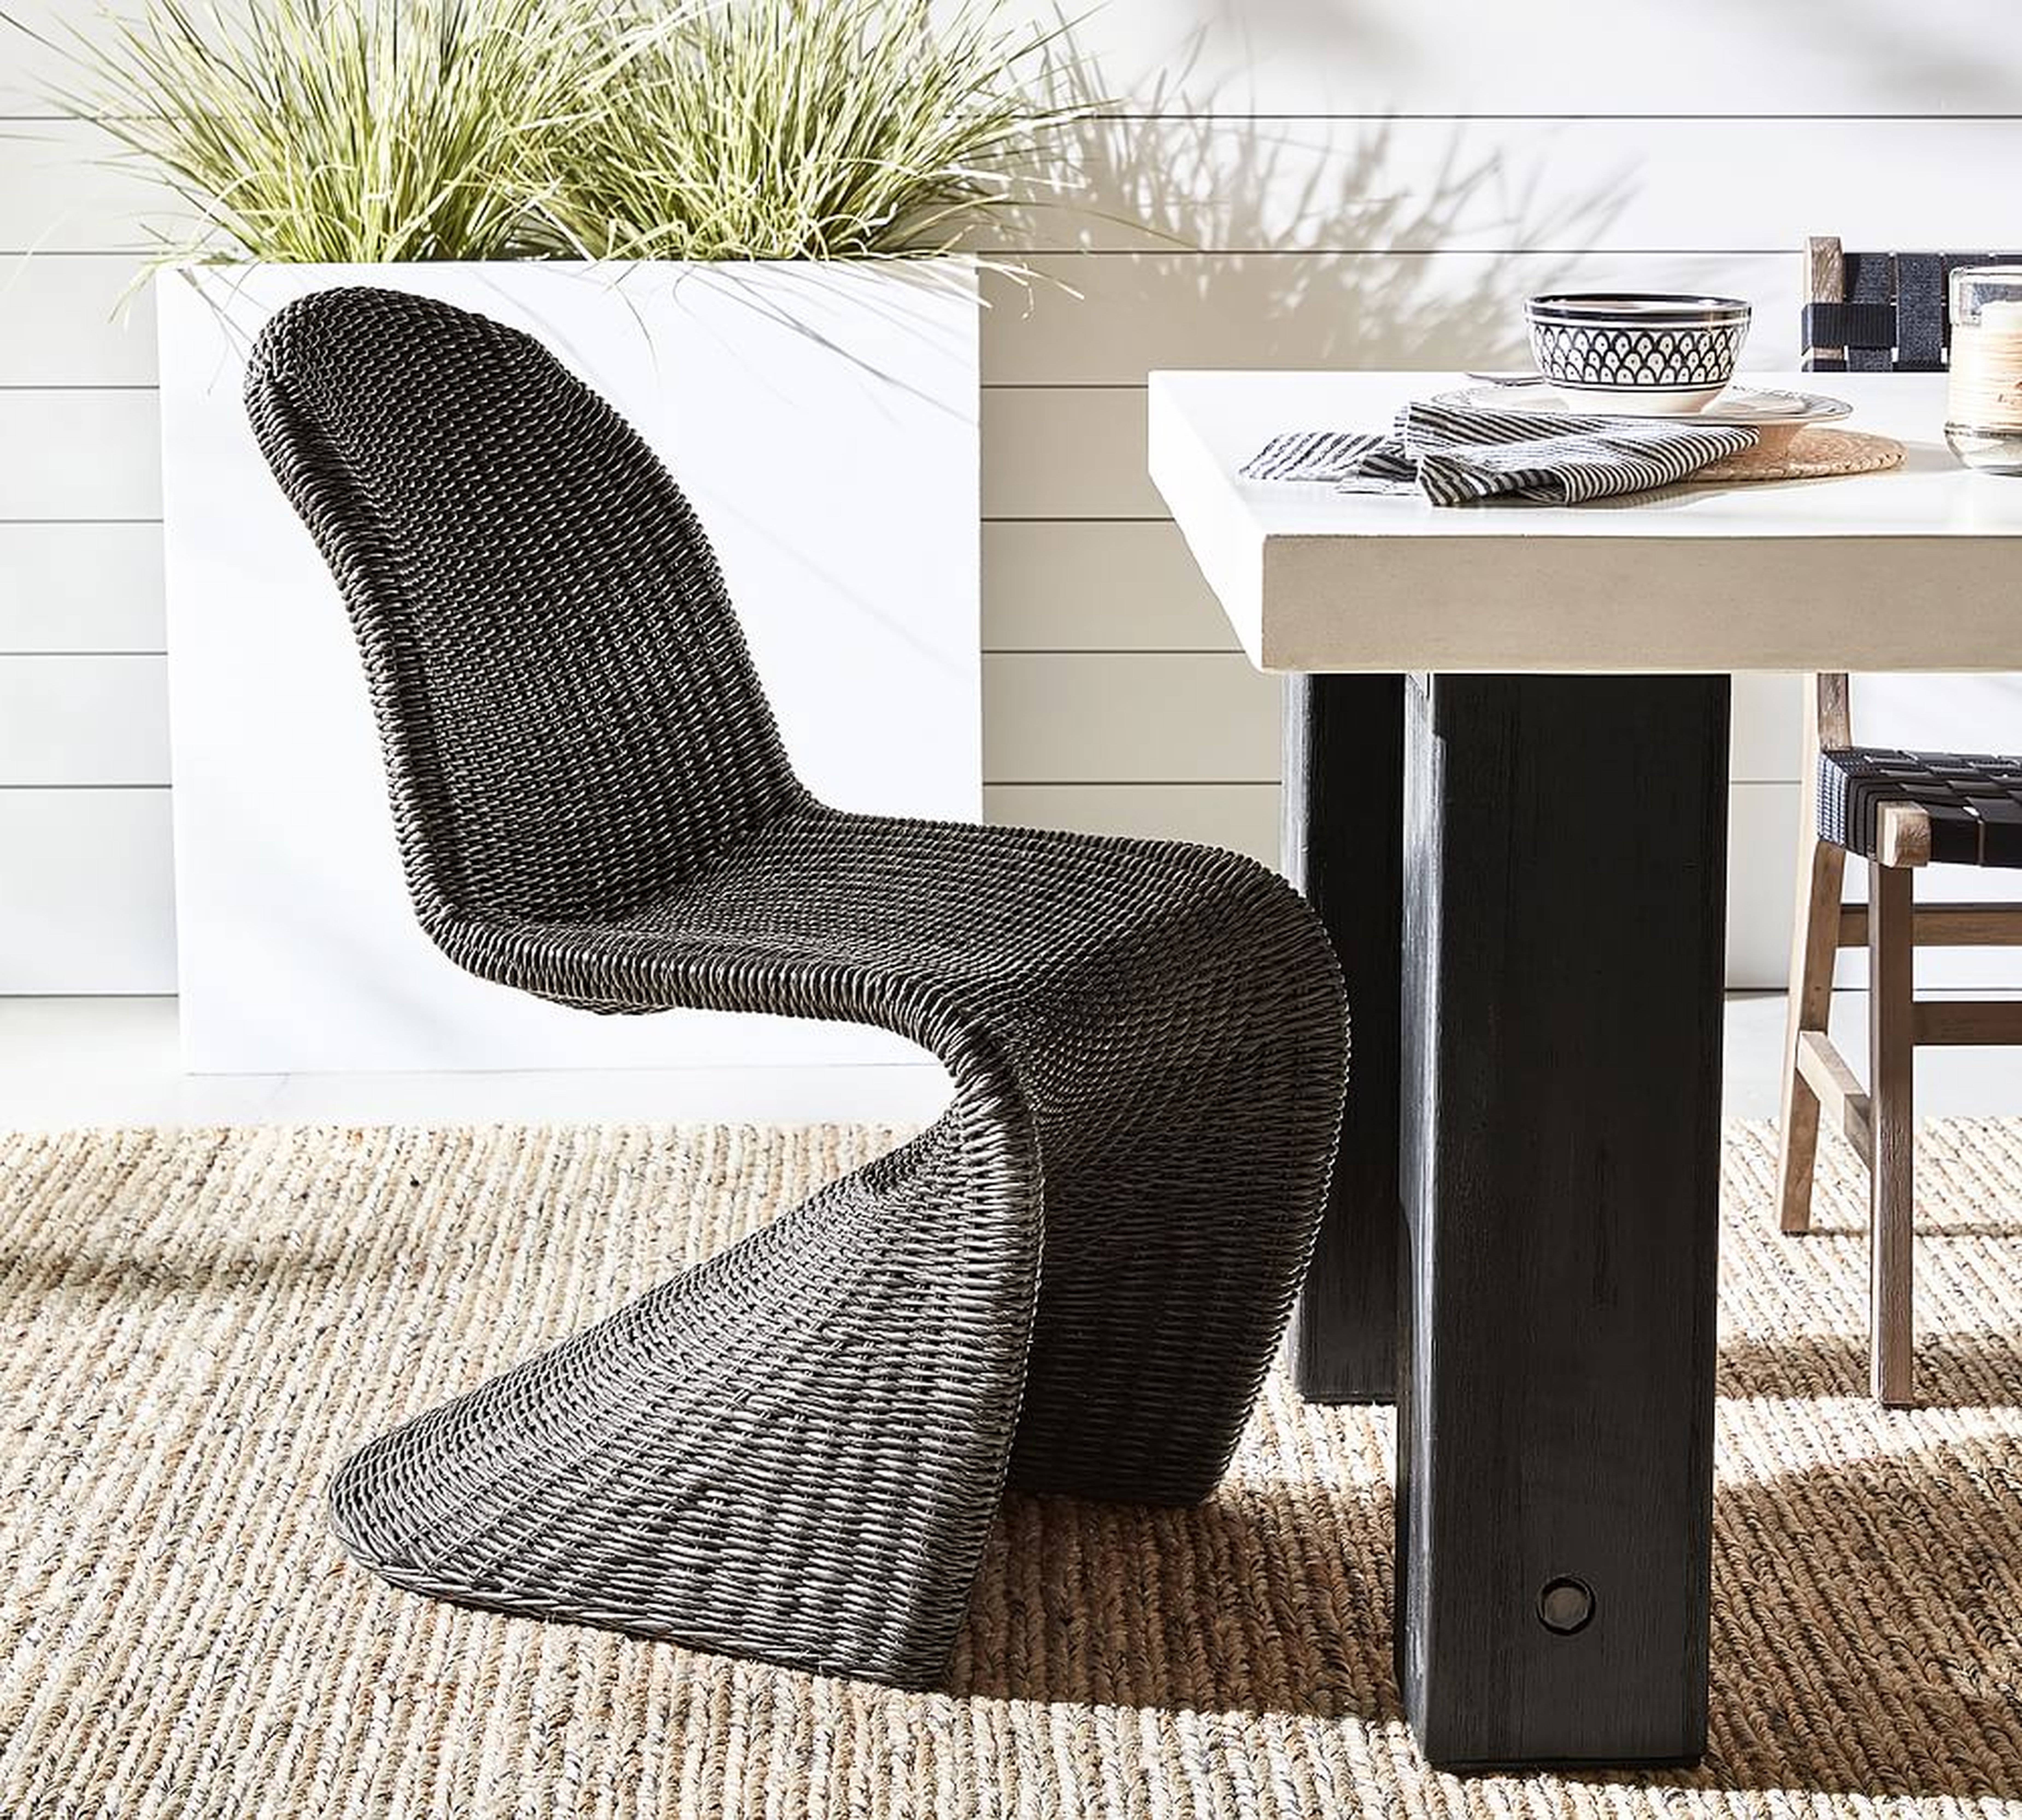 Encinitas All-Weather Wicker Dining Chair, Black - Pottery Barn